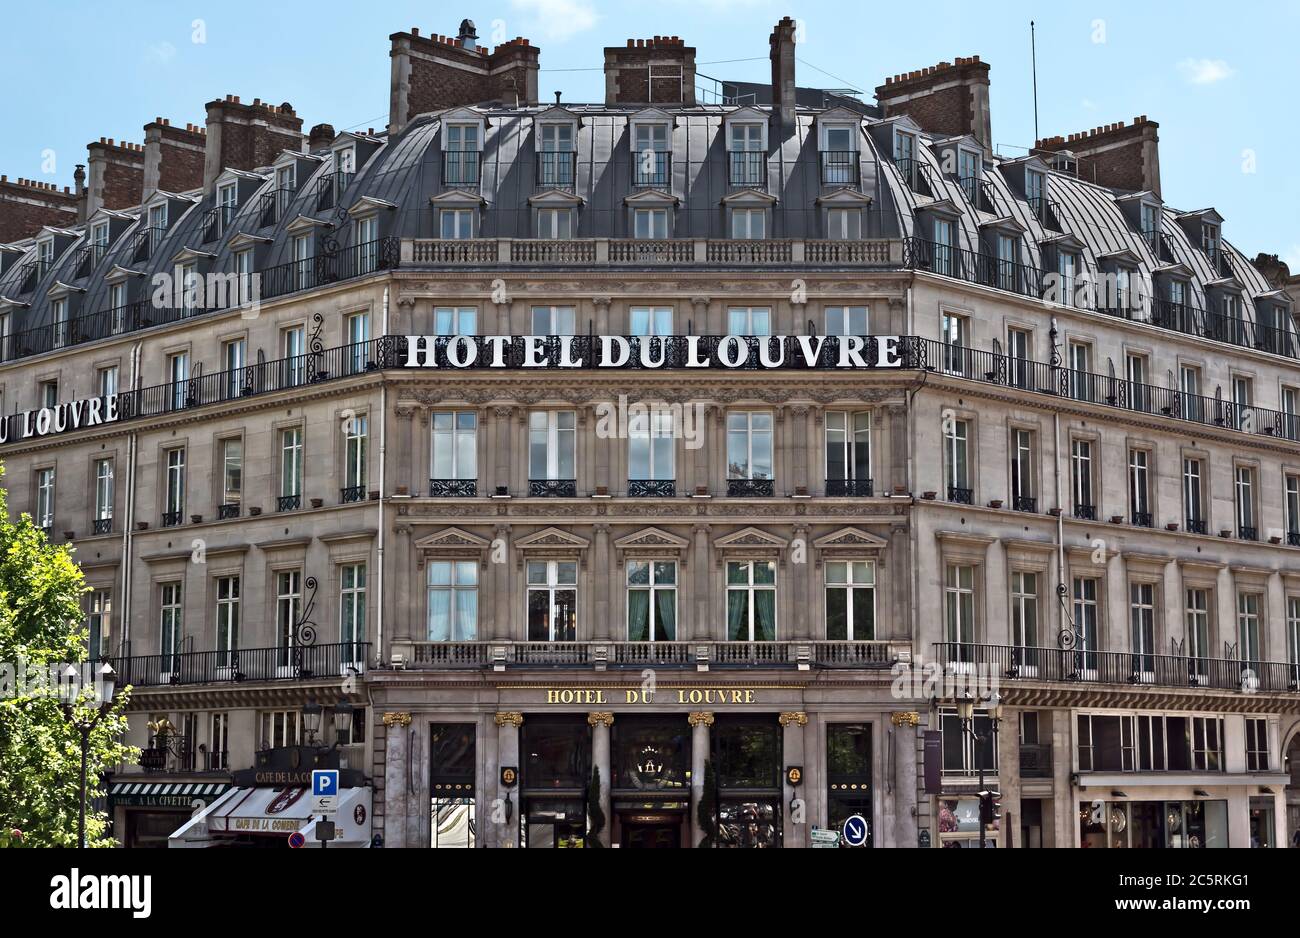 PARIS, FRANCE - JUNE 11, 2014: Facade of the Grand Hotel du Louvre, Hyatt Hotel in Paris. Located near Louvre Palace in a beautiful historic building Stock Photo